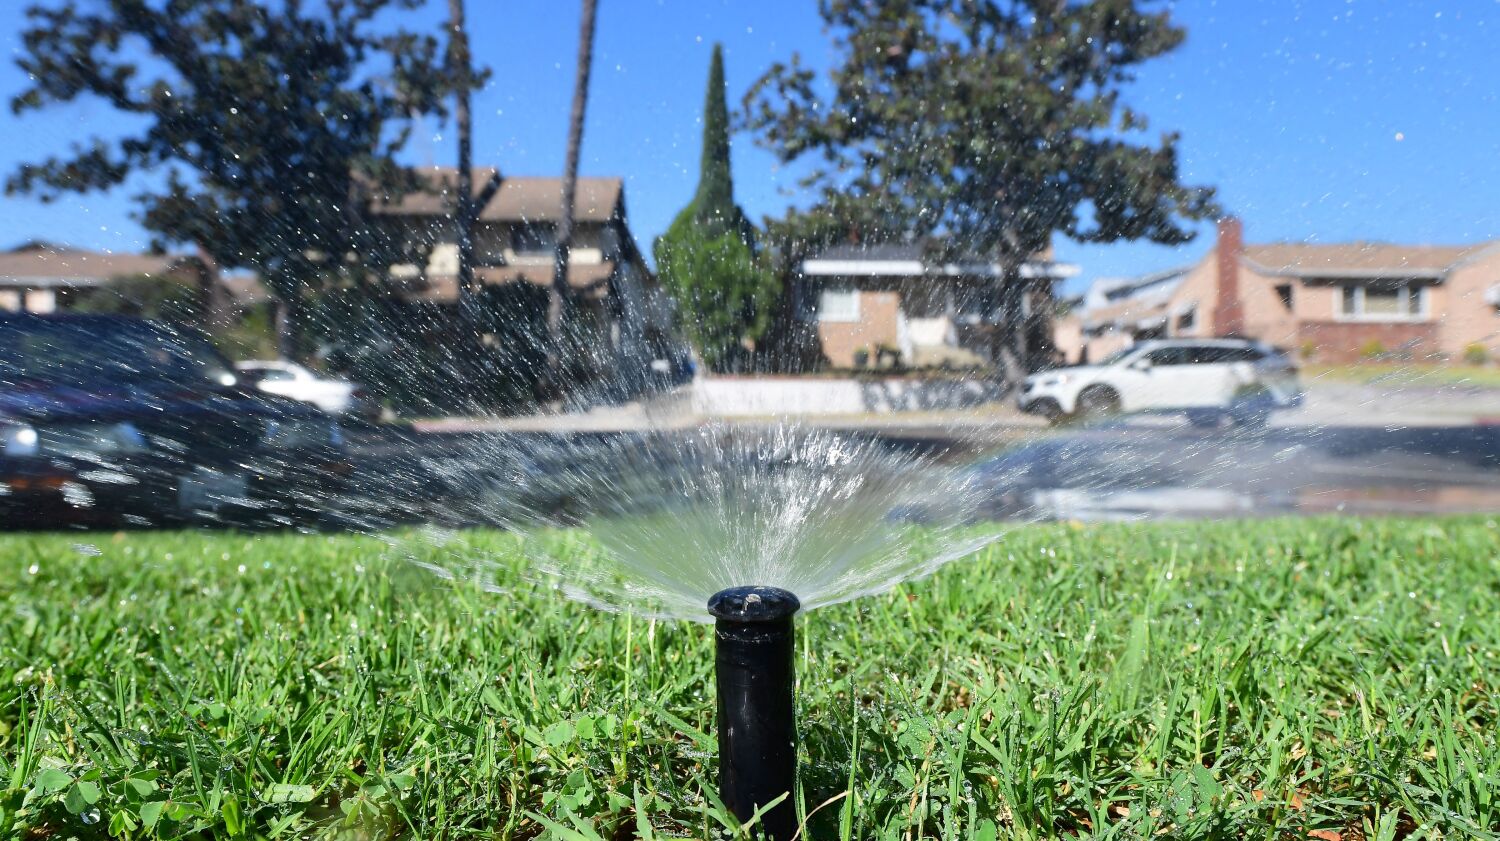 California considers $500 fines for water wasters as drought worsens, conservation lags